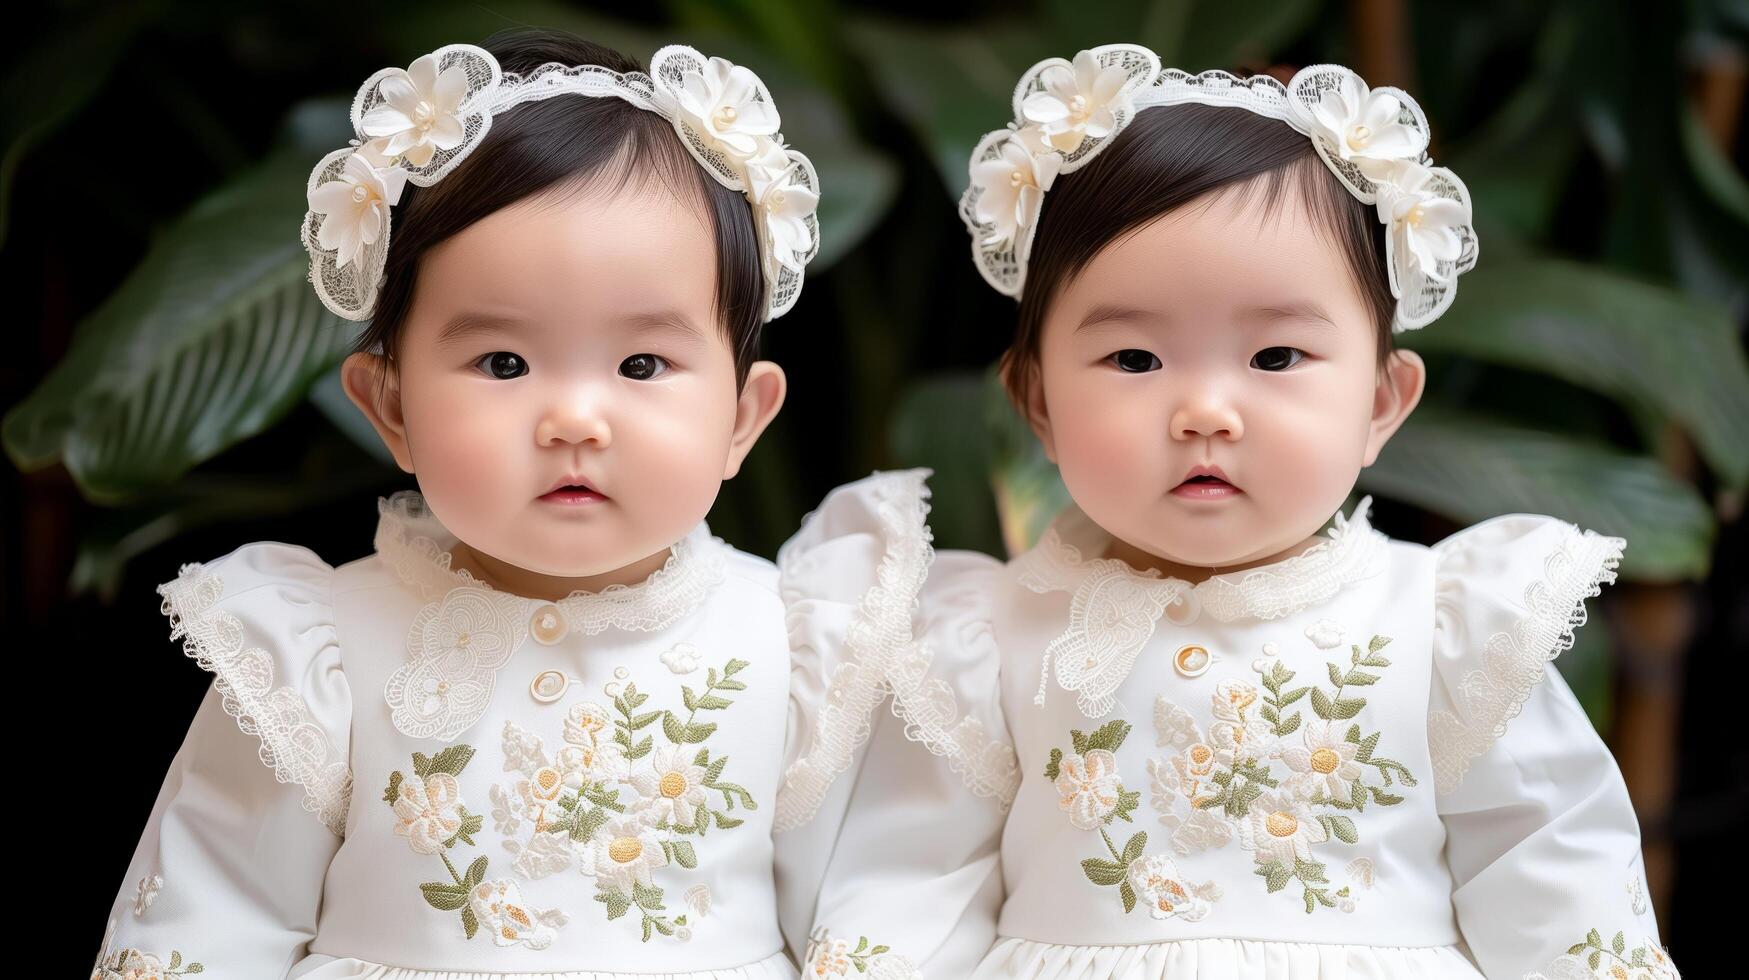 Twin Toddlers in Matching Floral Dresses and Headbands photo